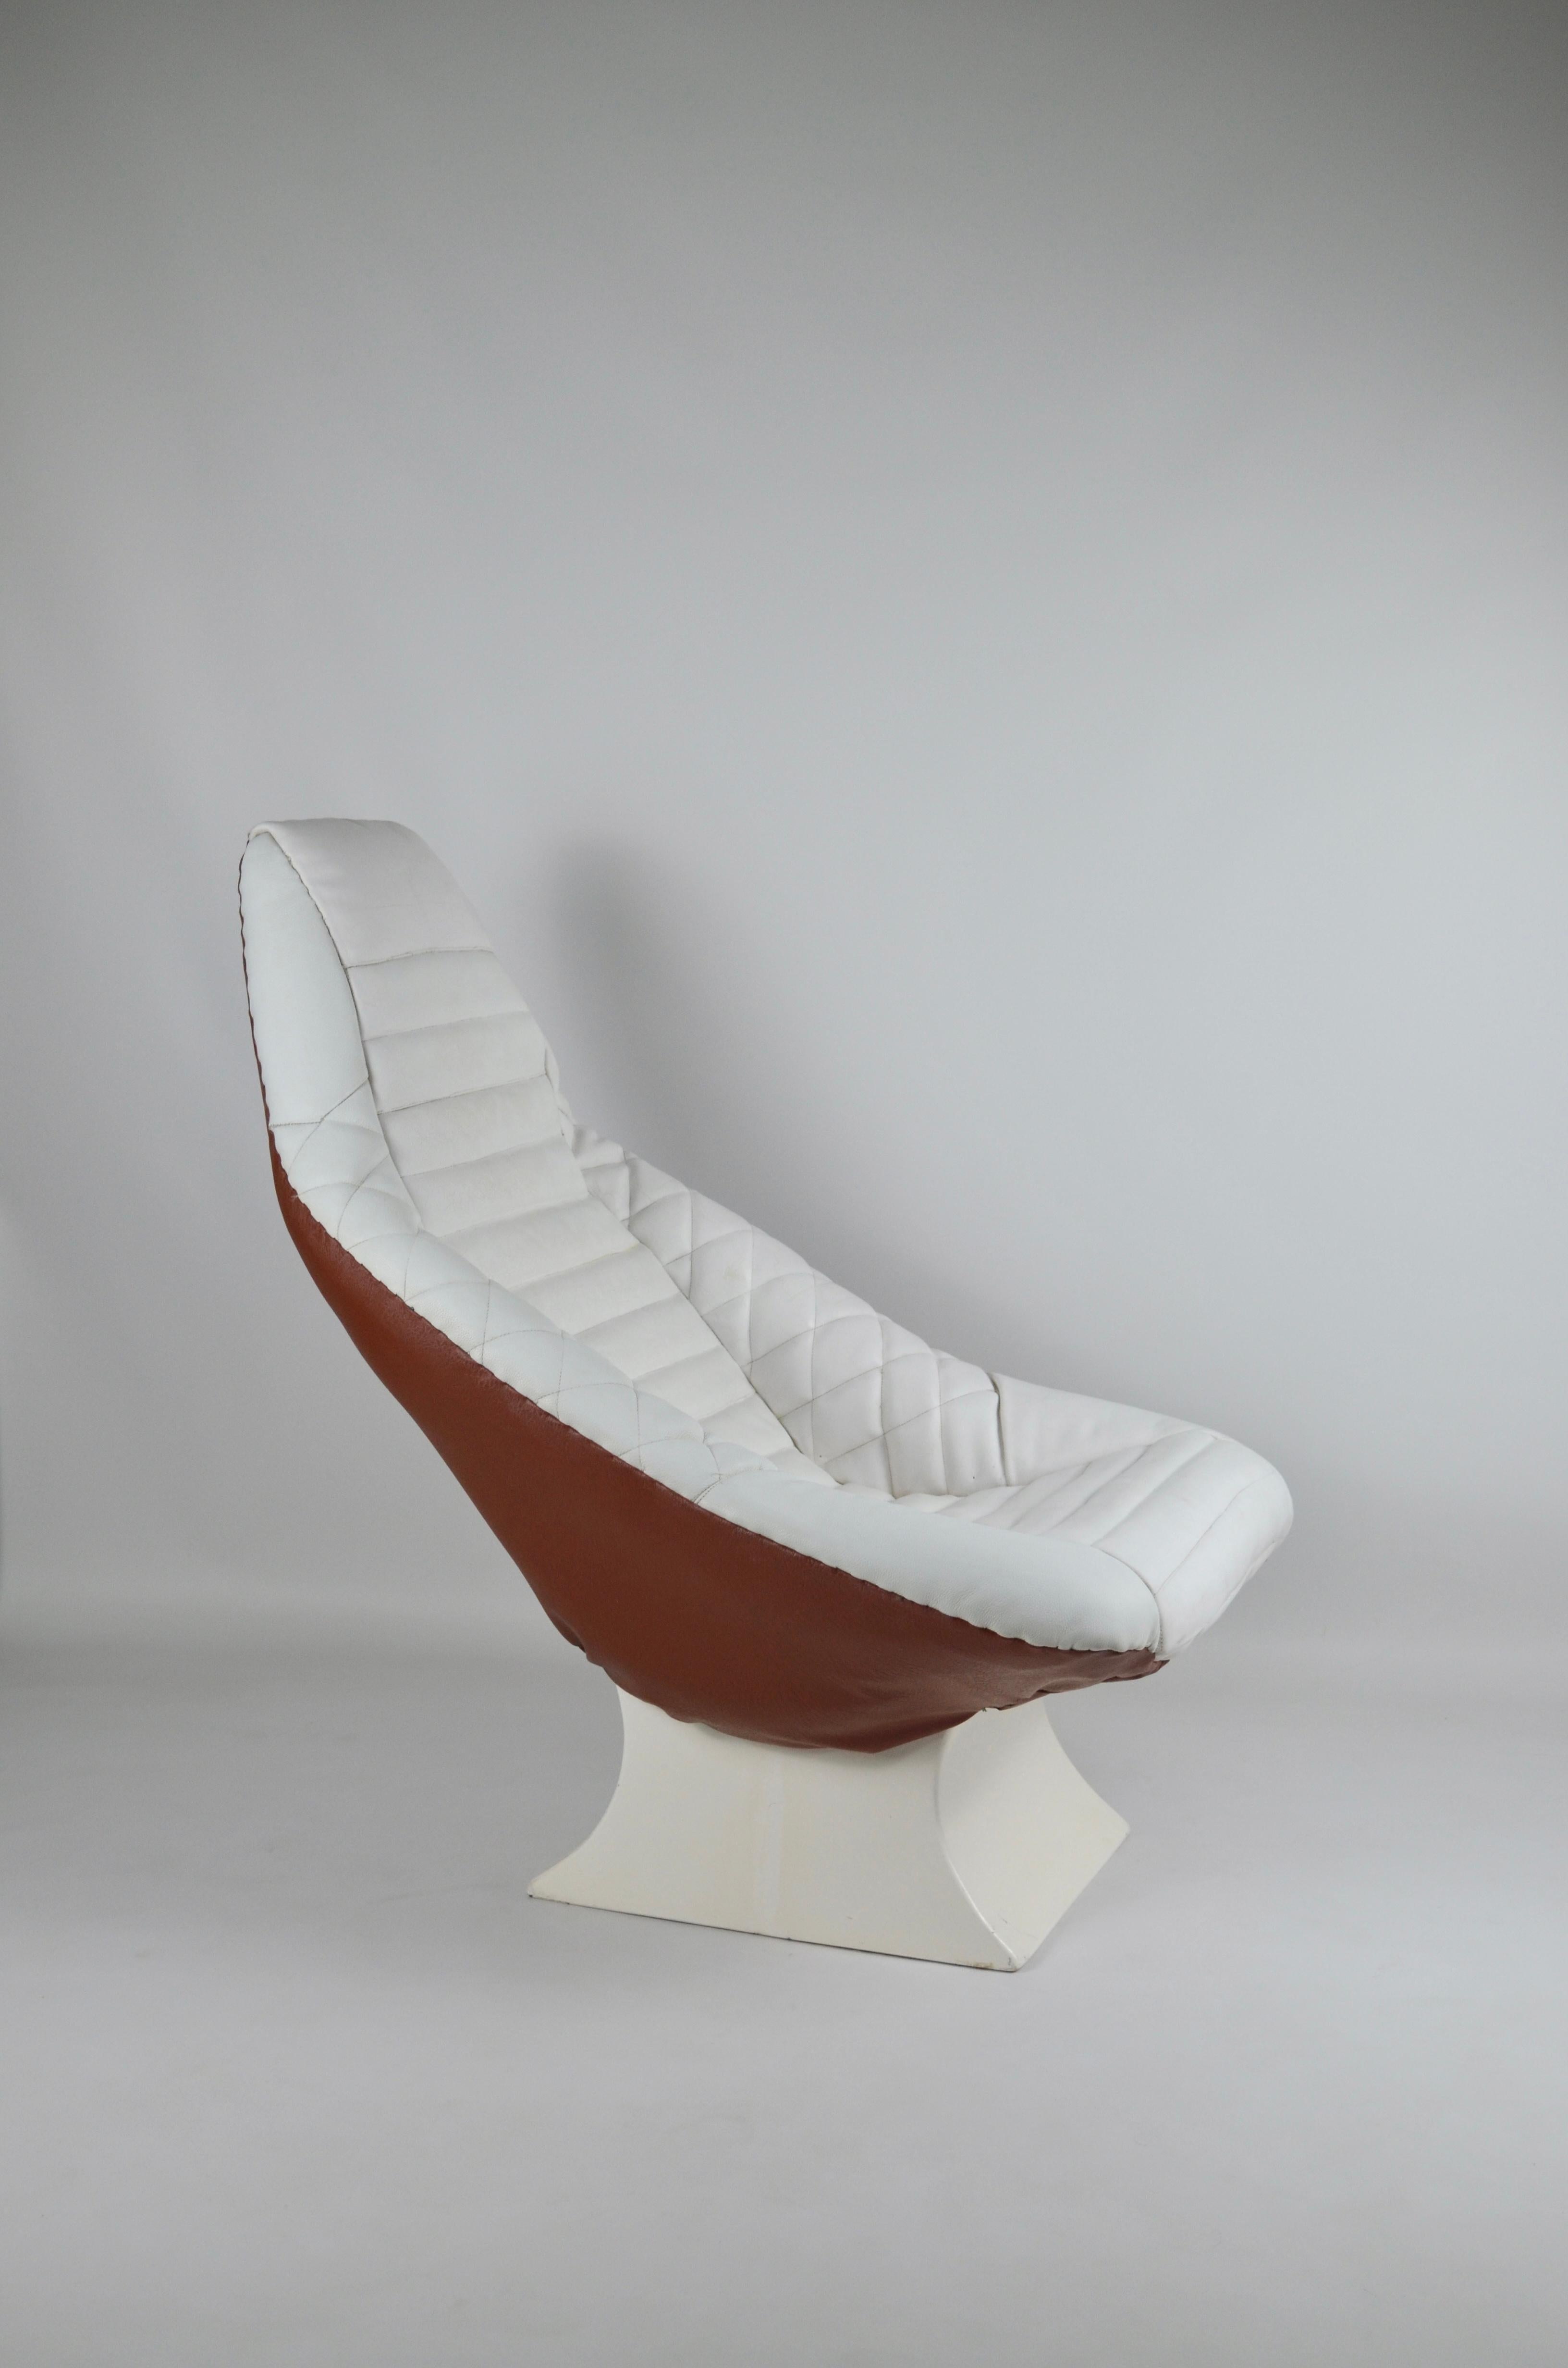 vintage space age armchair, Italy, 1970s
It is made of white leather on the upper part and brown leather on the lower part
The base is fiberglass.